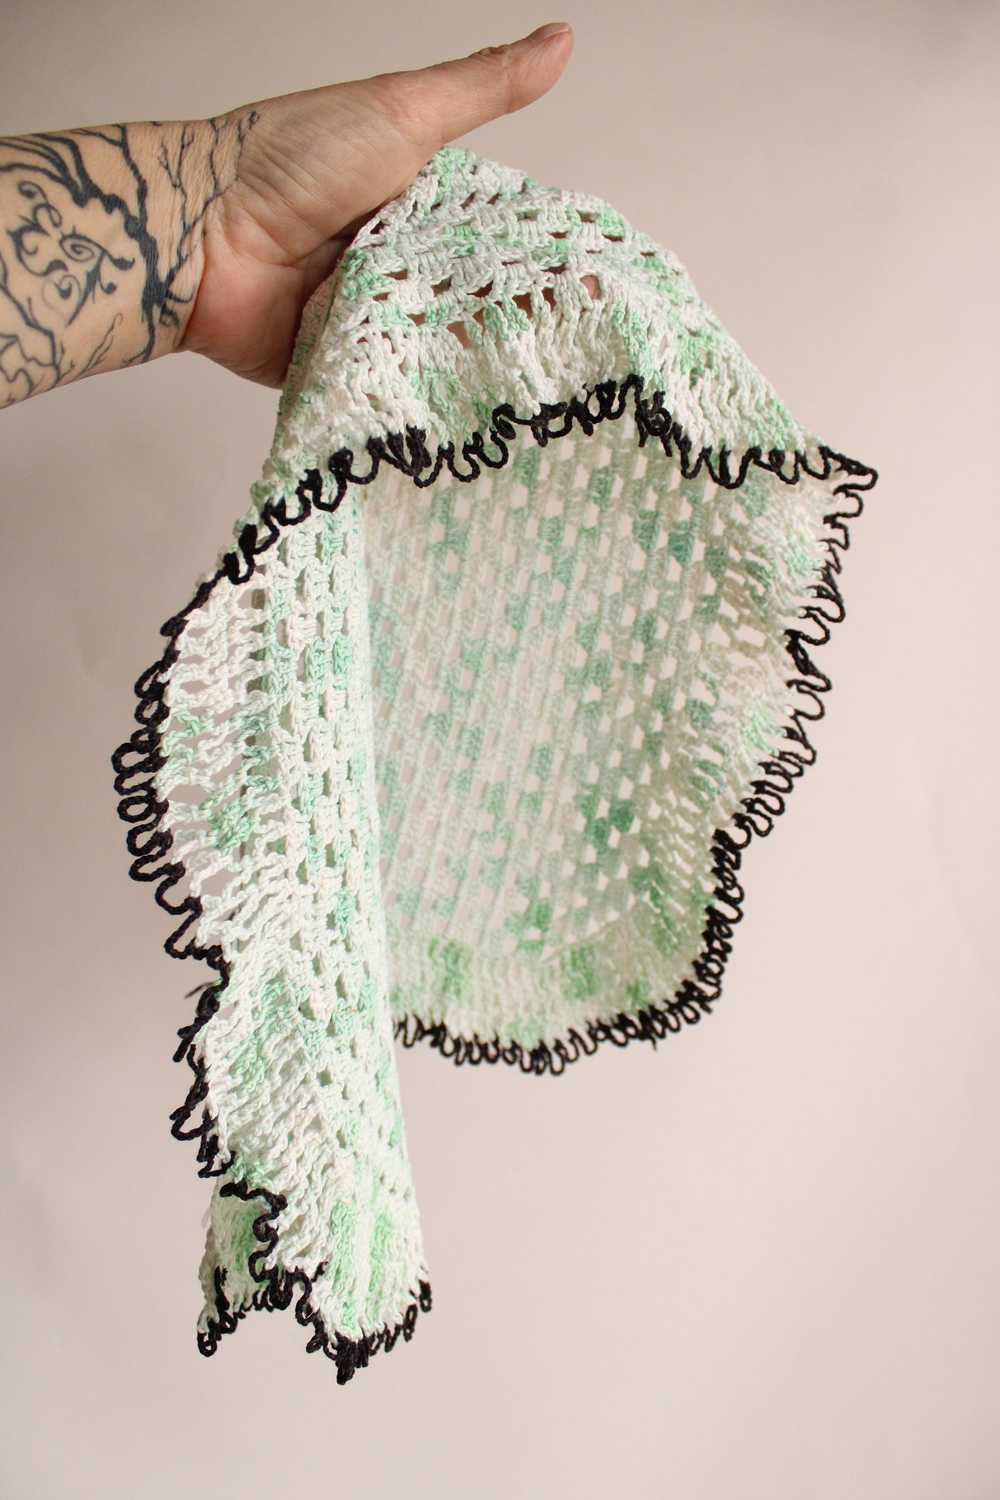 Vintage Crochet Doily in Green and White And Black - image 10